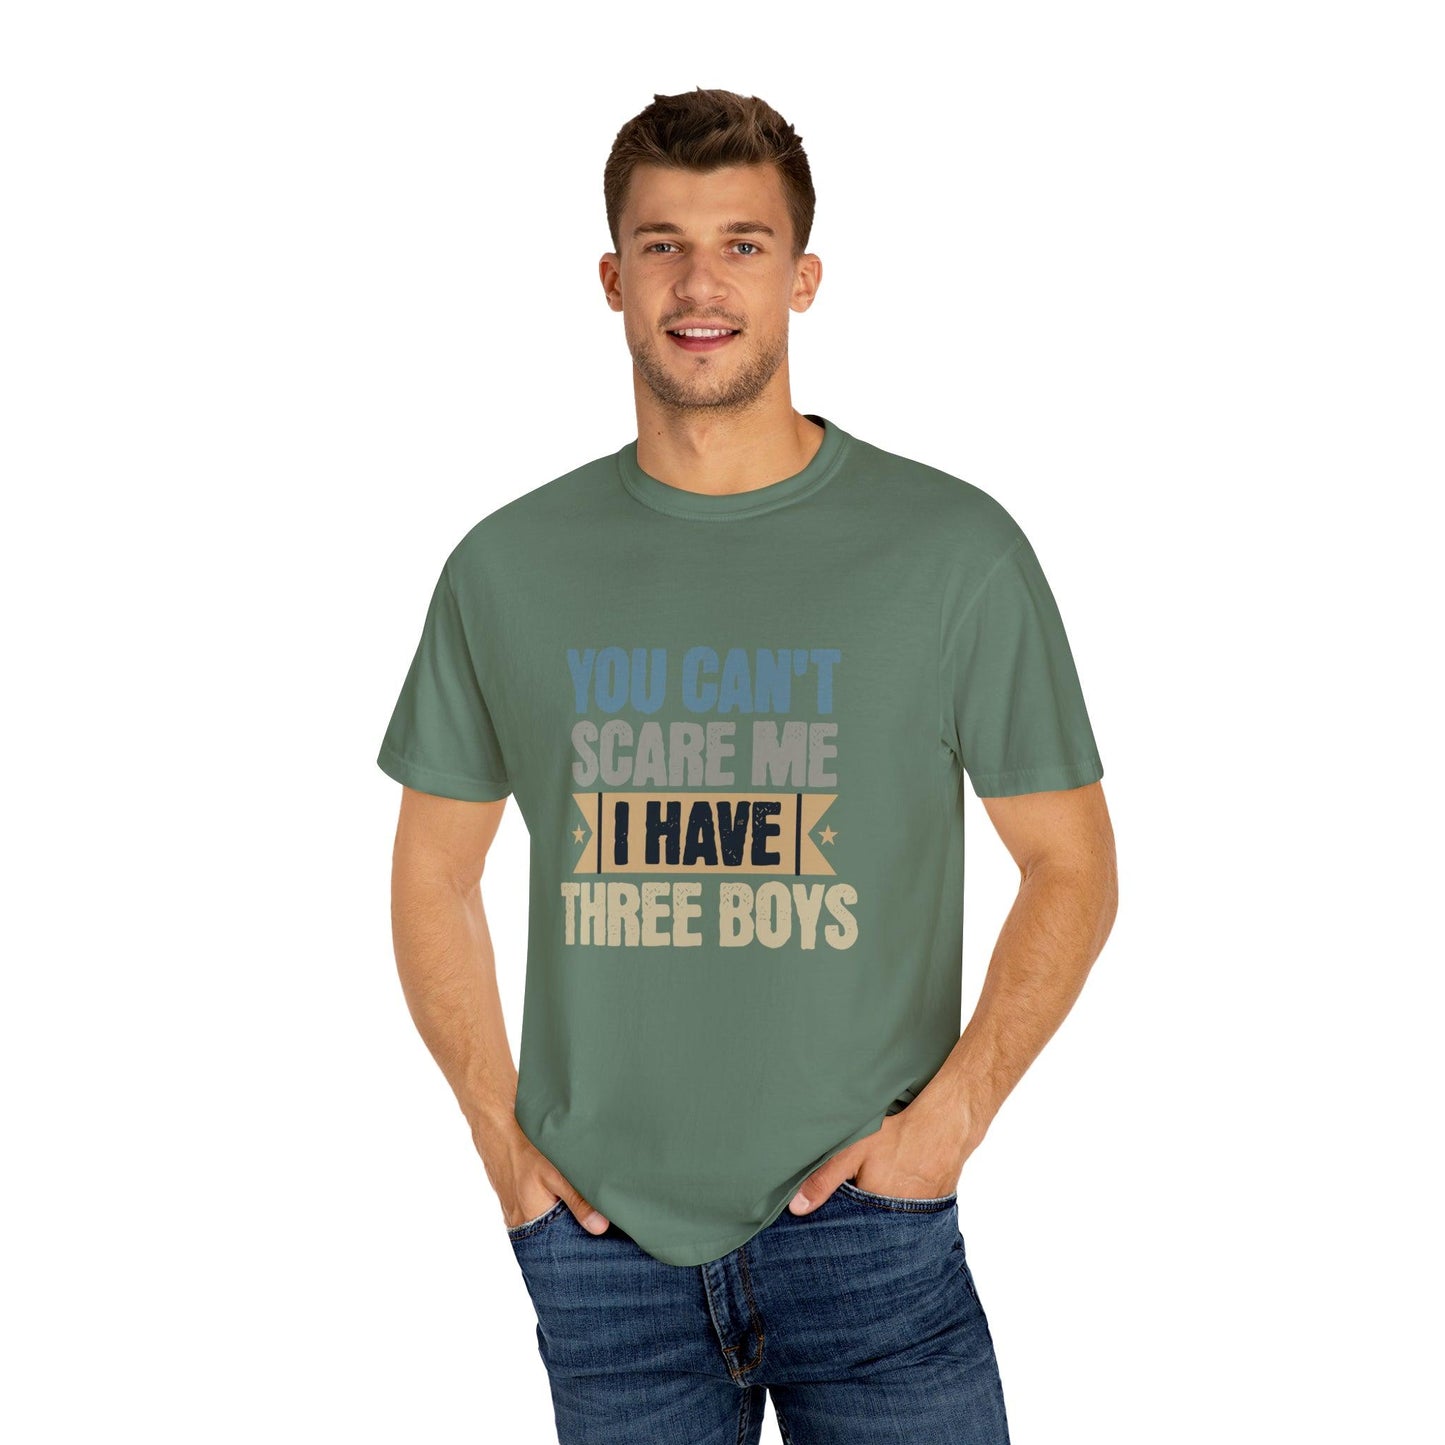 You Can't Scare Me, I Have 3 Boys: Proud Mama T-Shirt - Pandaize